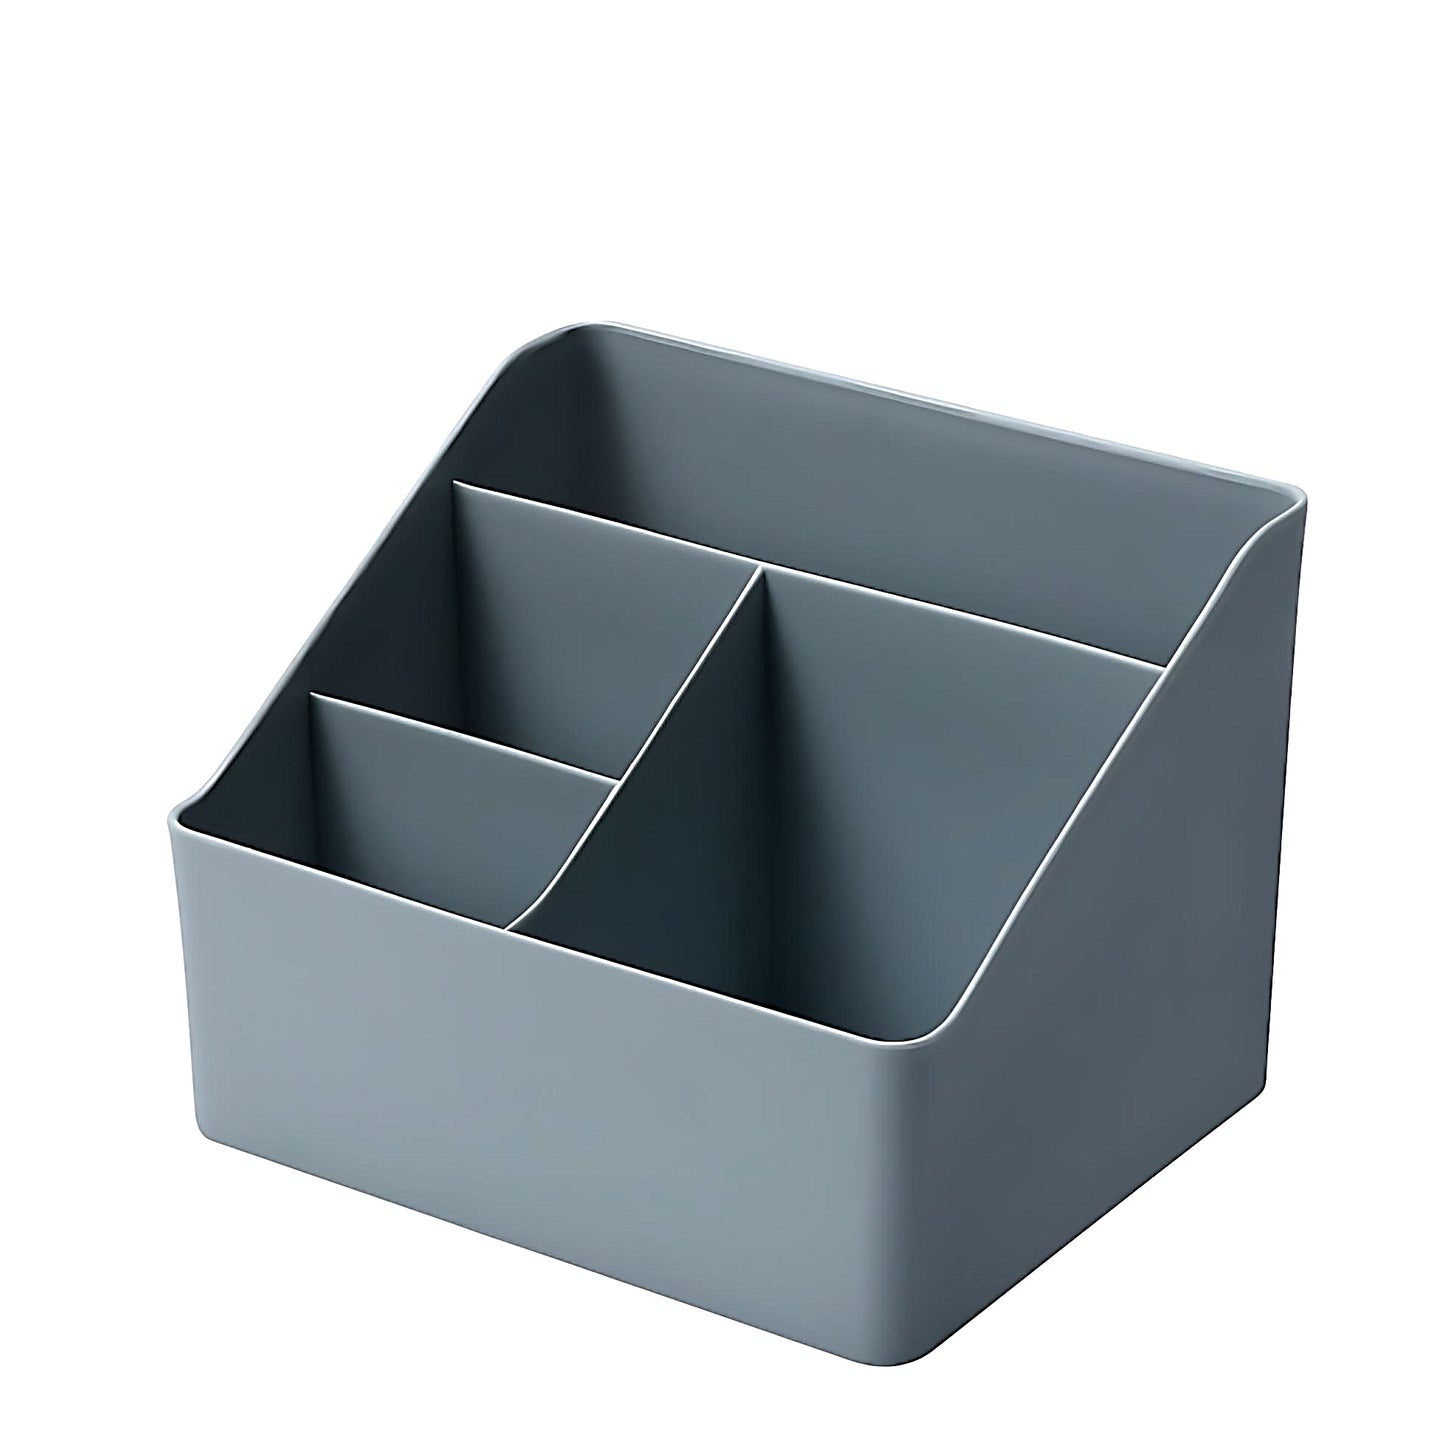 a grey desktop organizer with four compartments on a white background